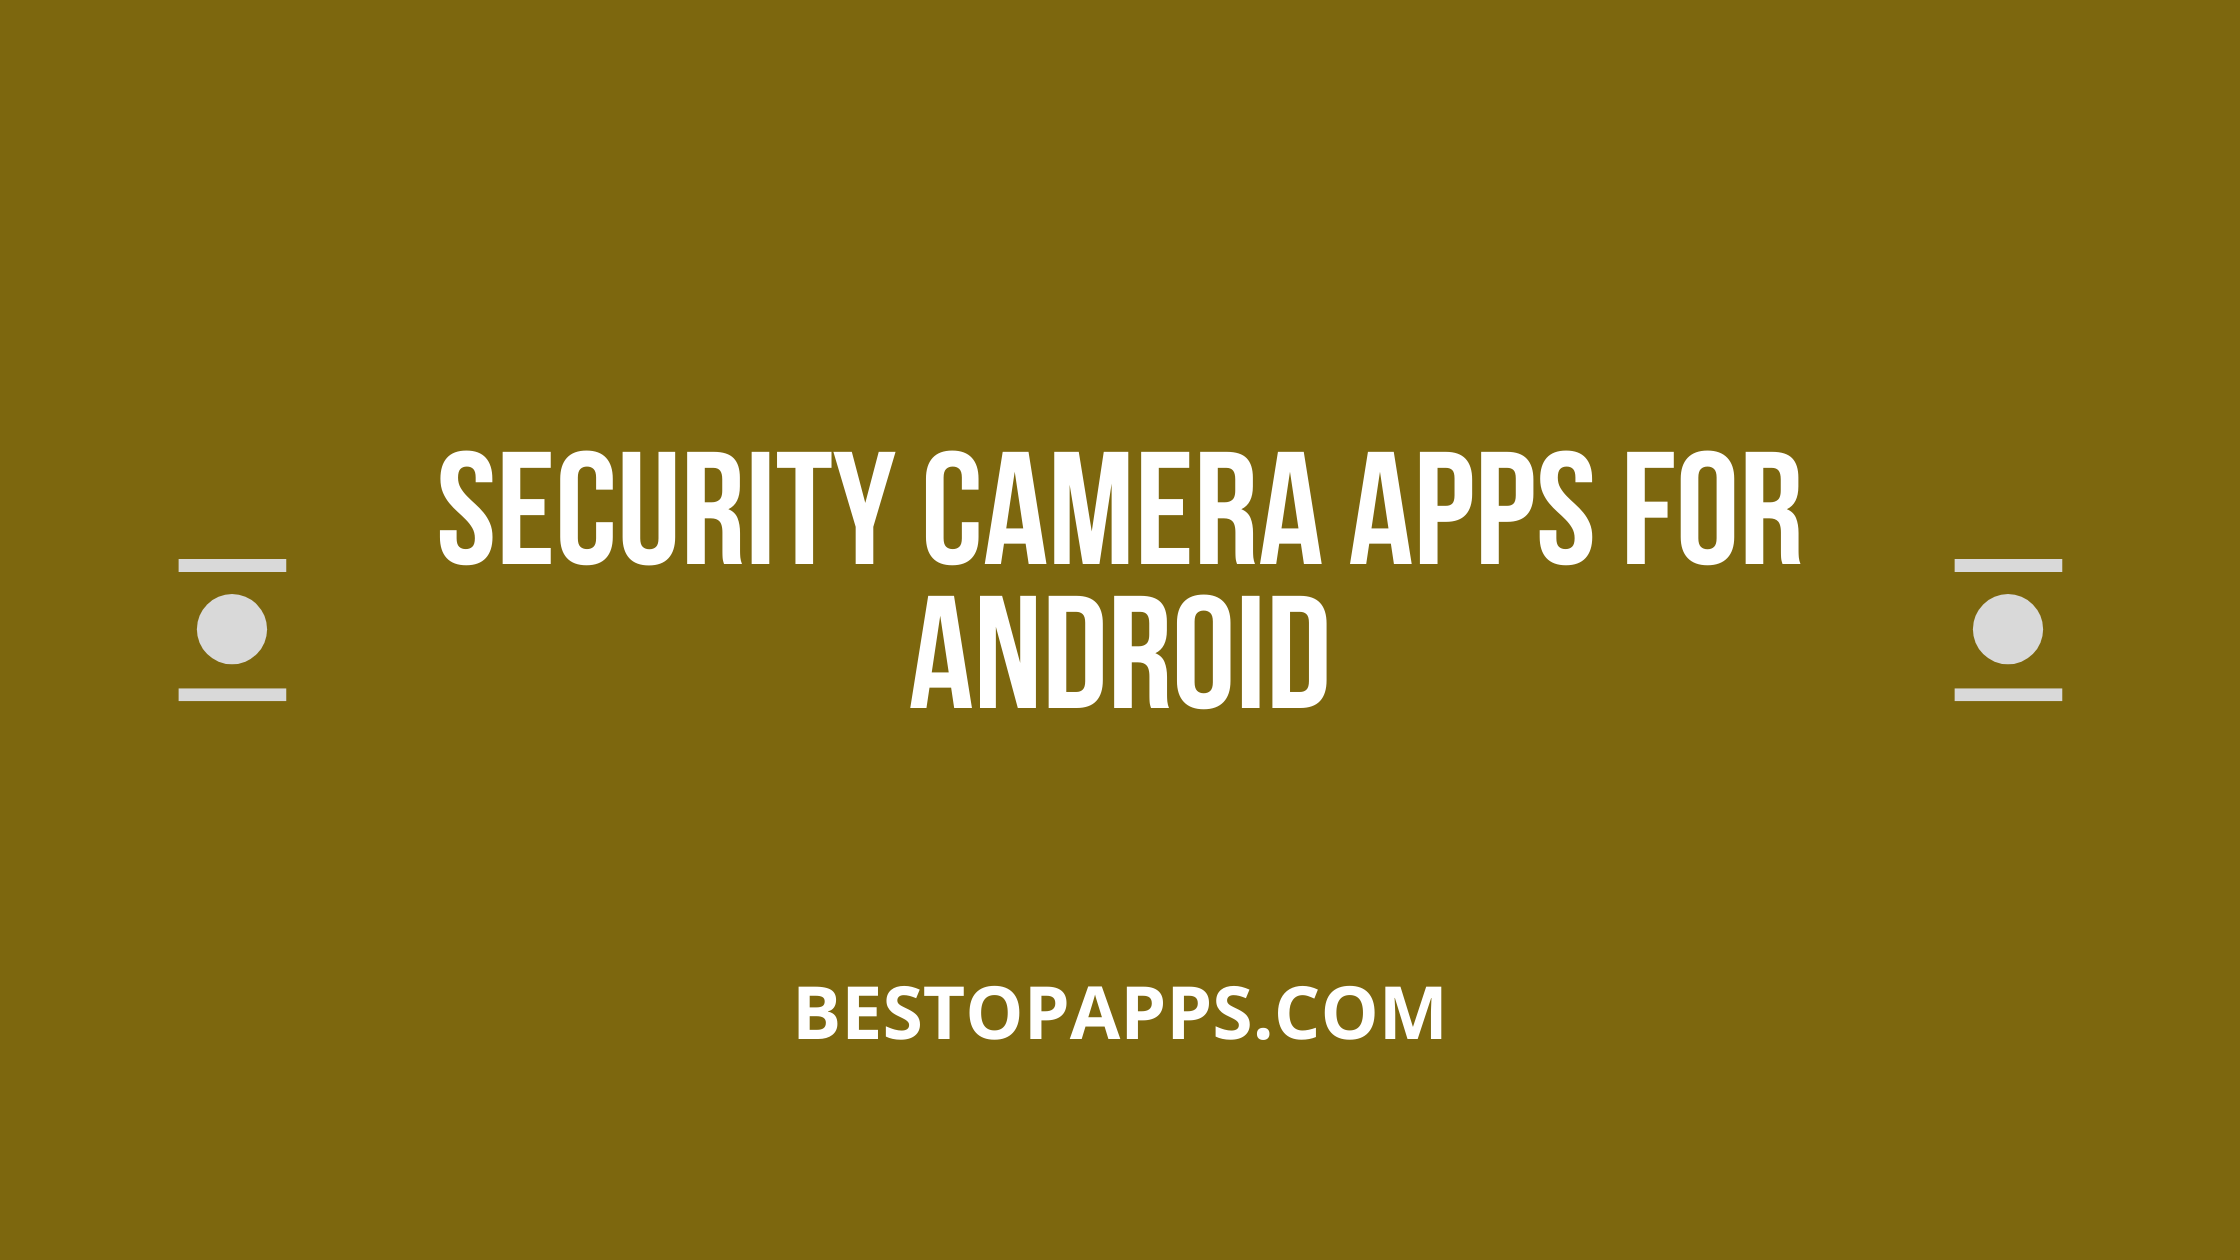 Security Camera Apps for Android